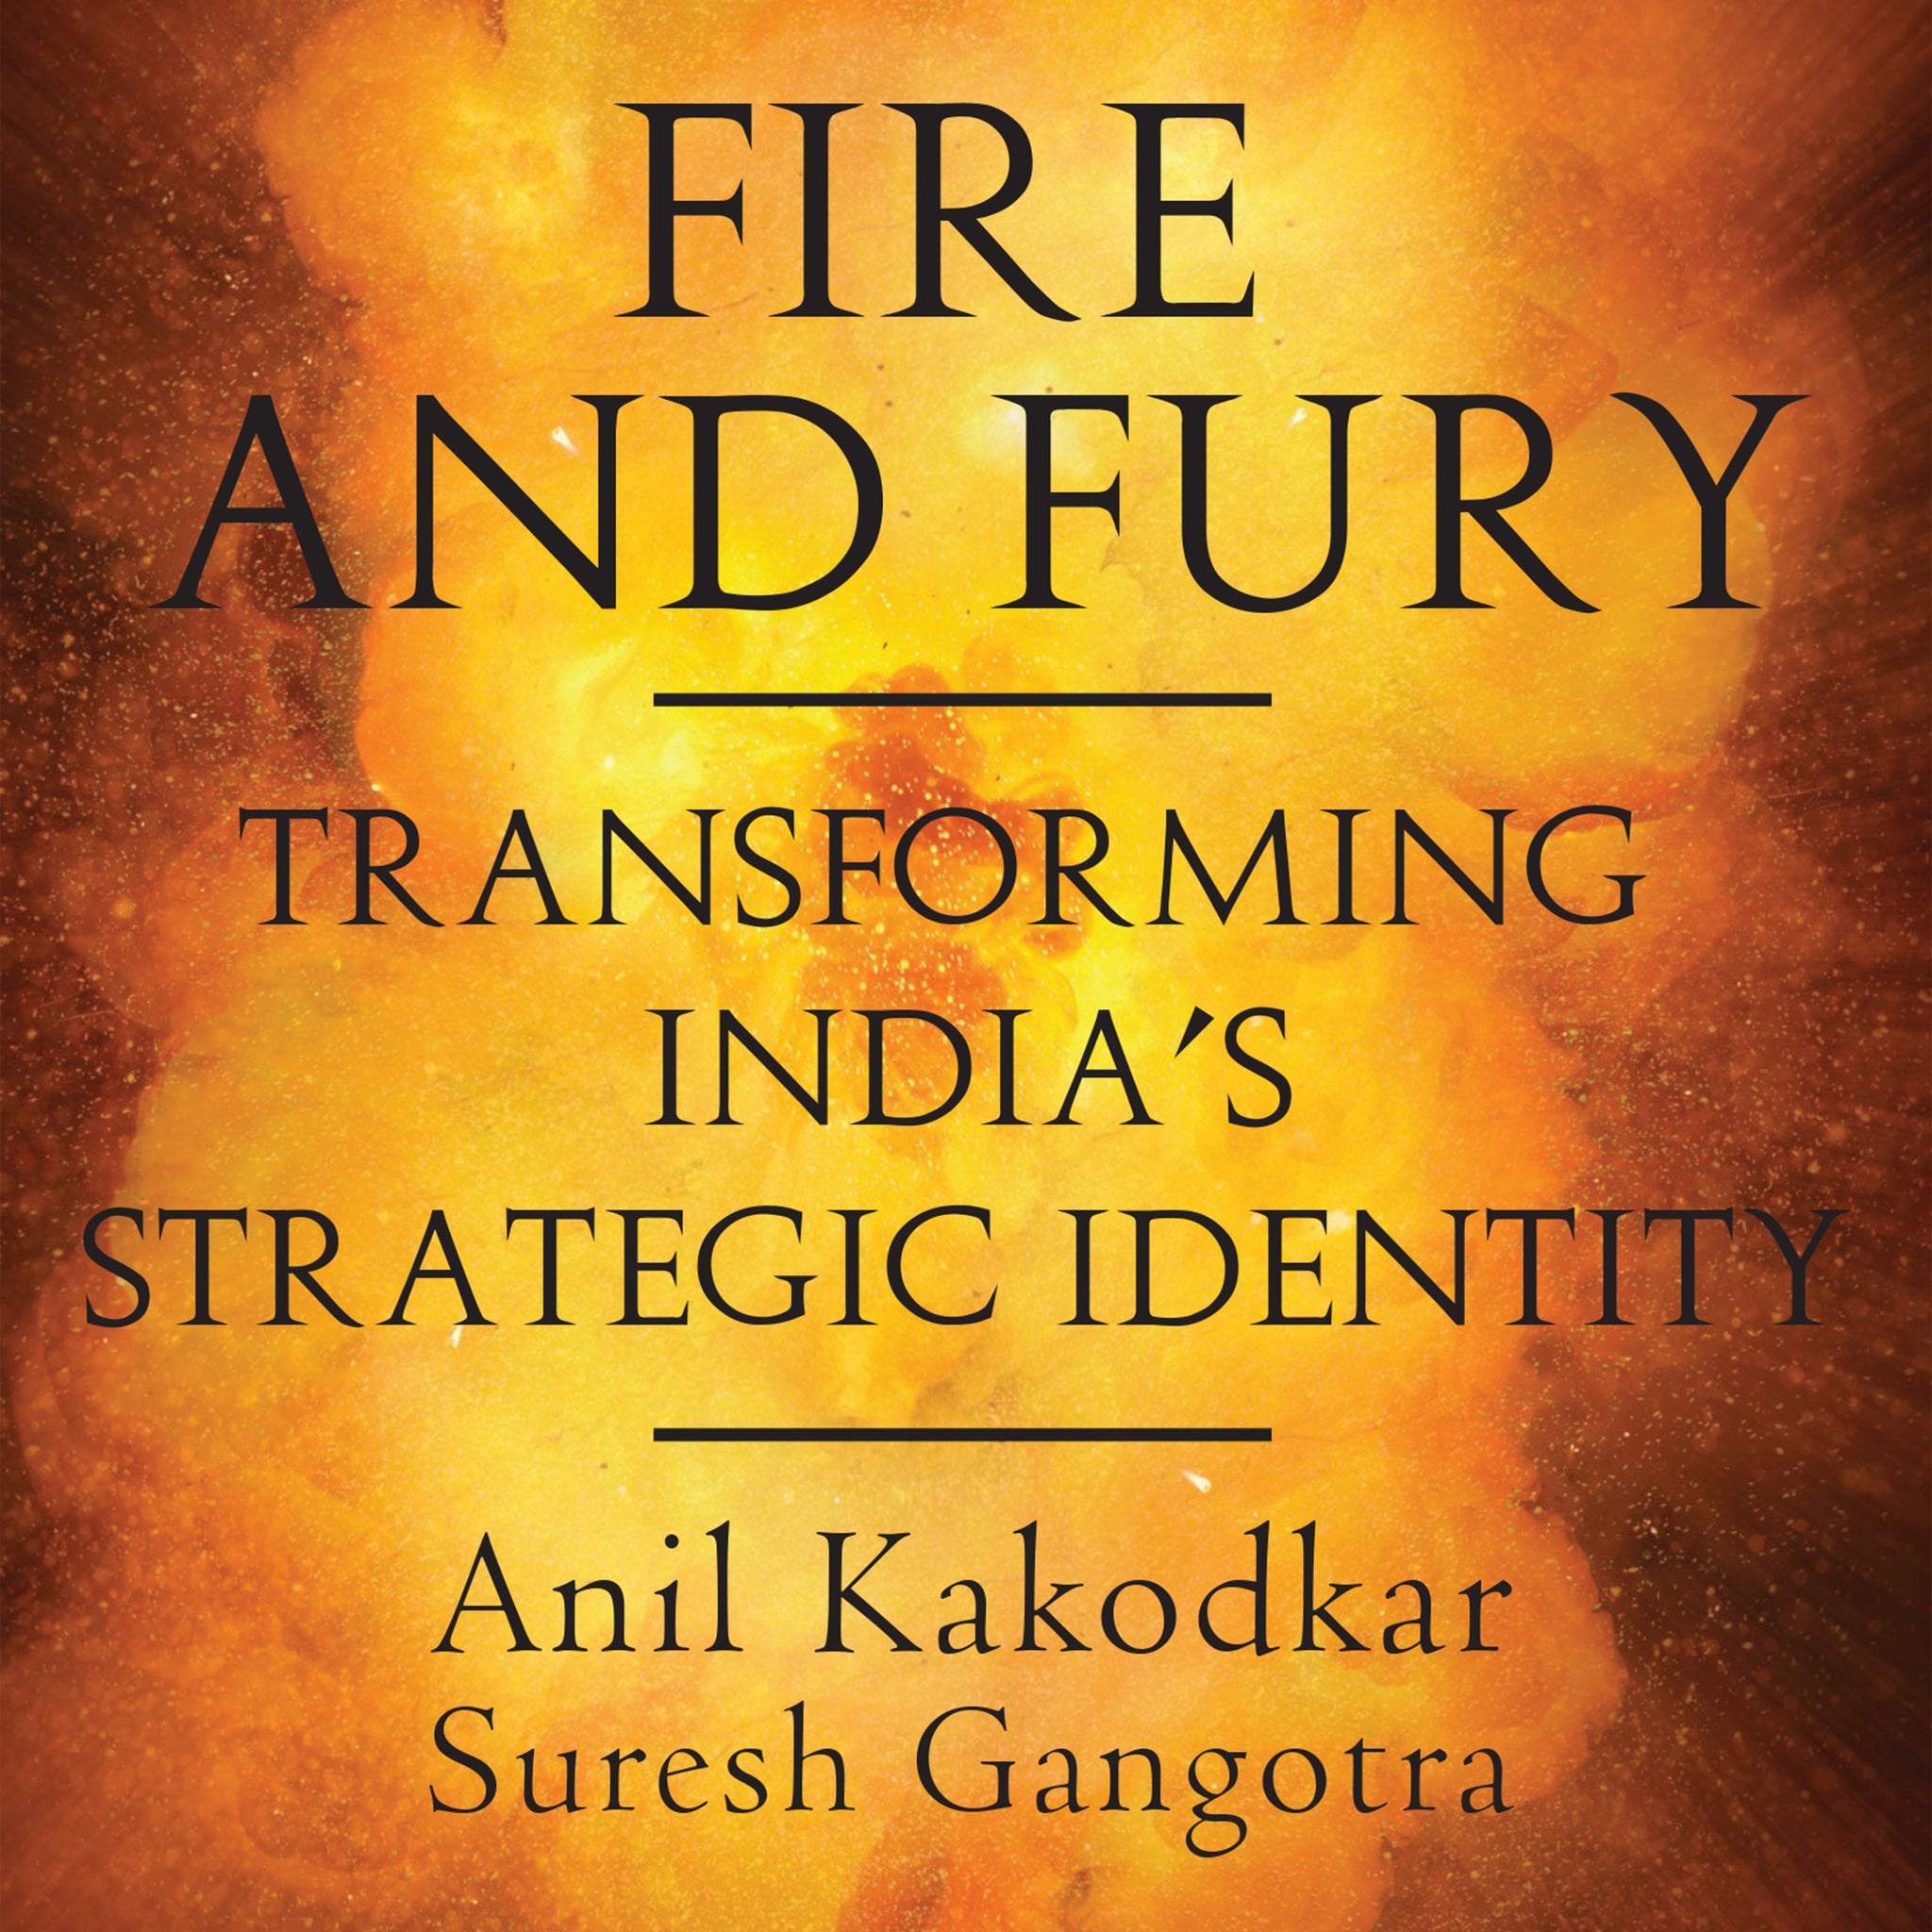 FIRE AND FURY TRANSFORMING INDIA'S STRATEGIC IDENTITY